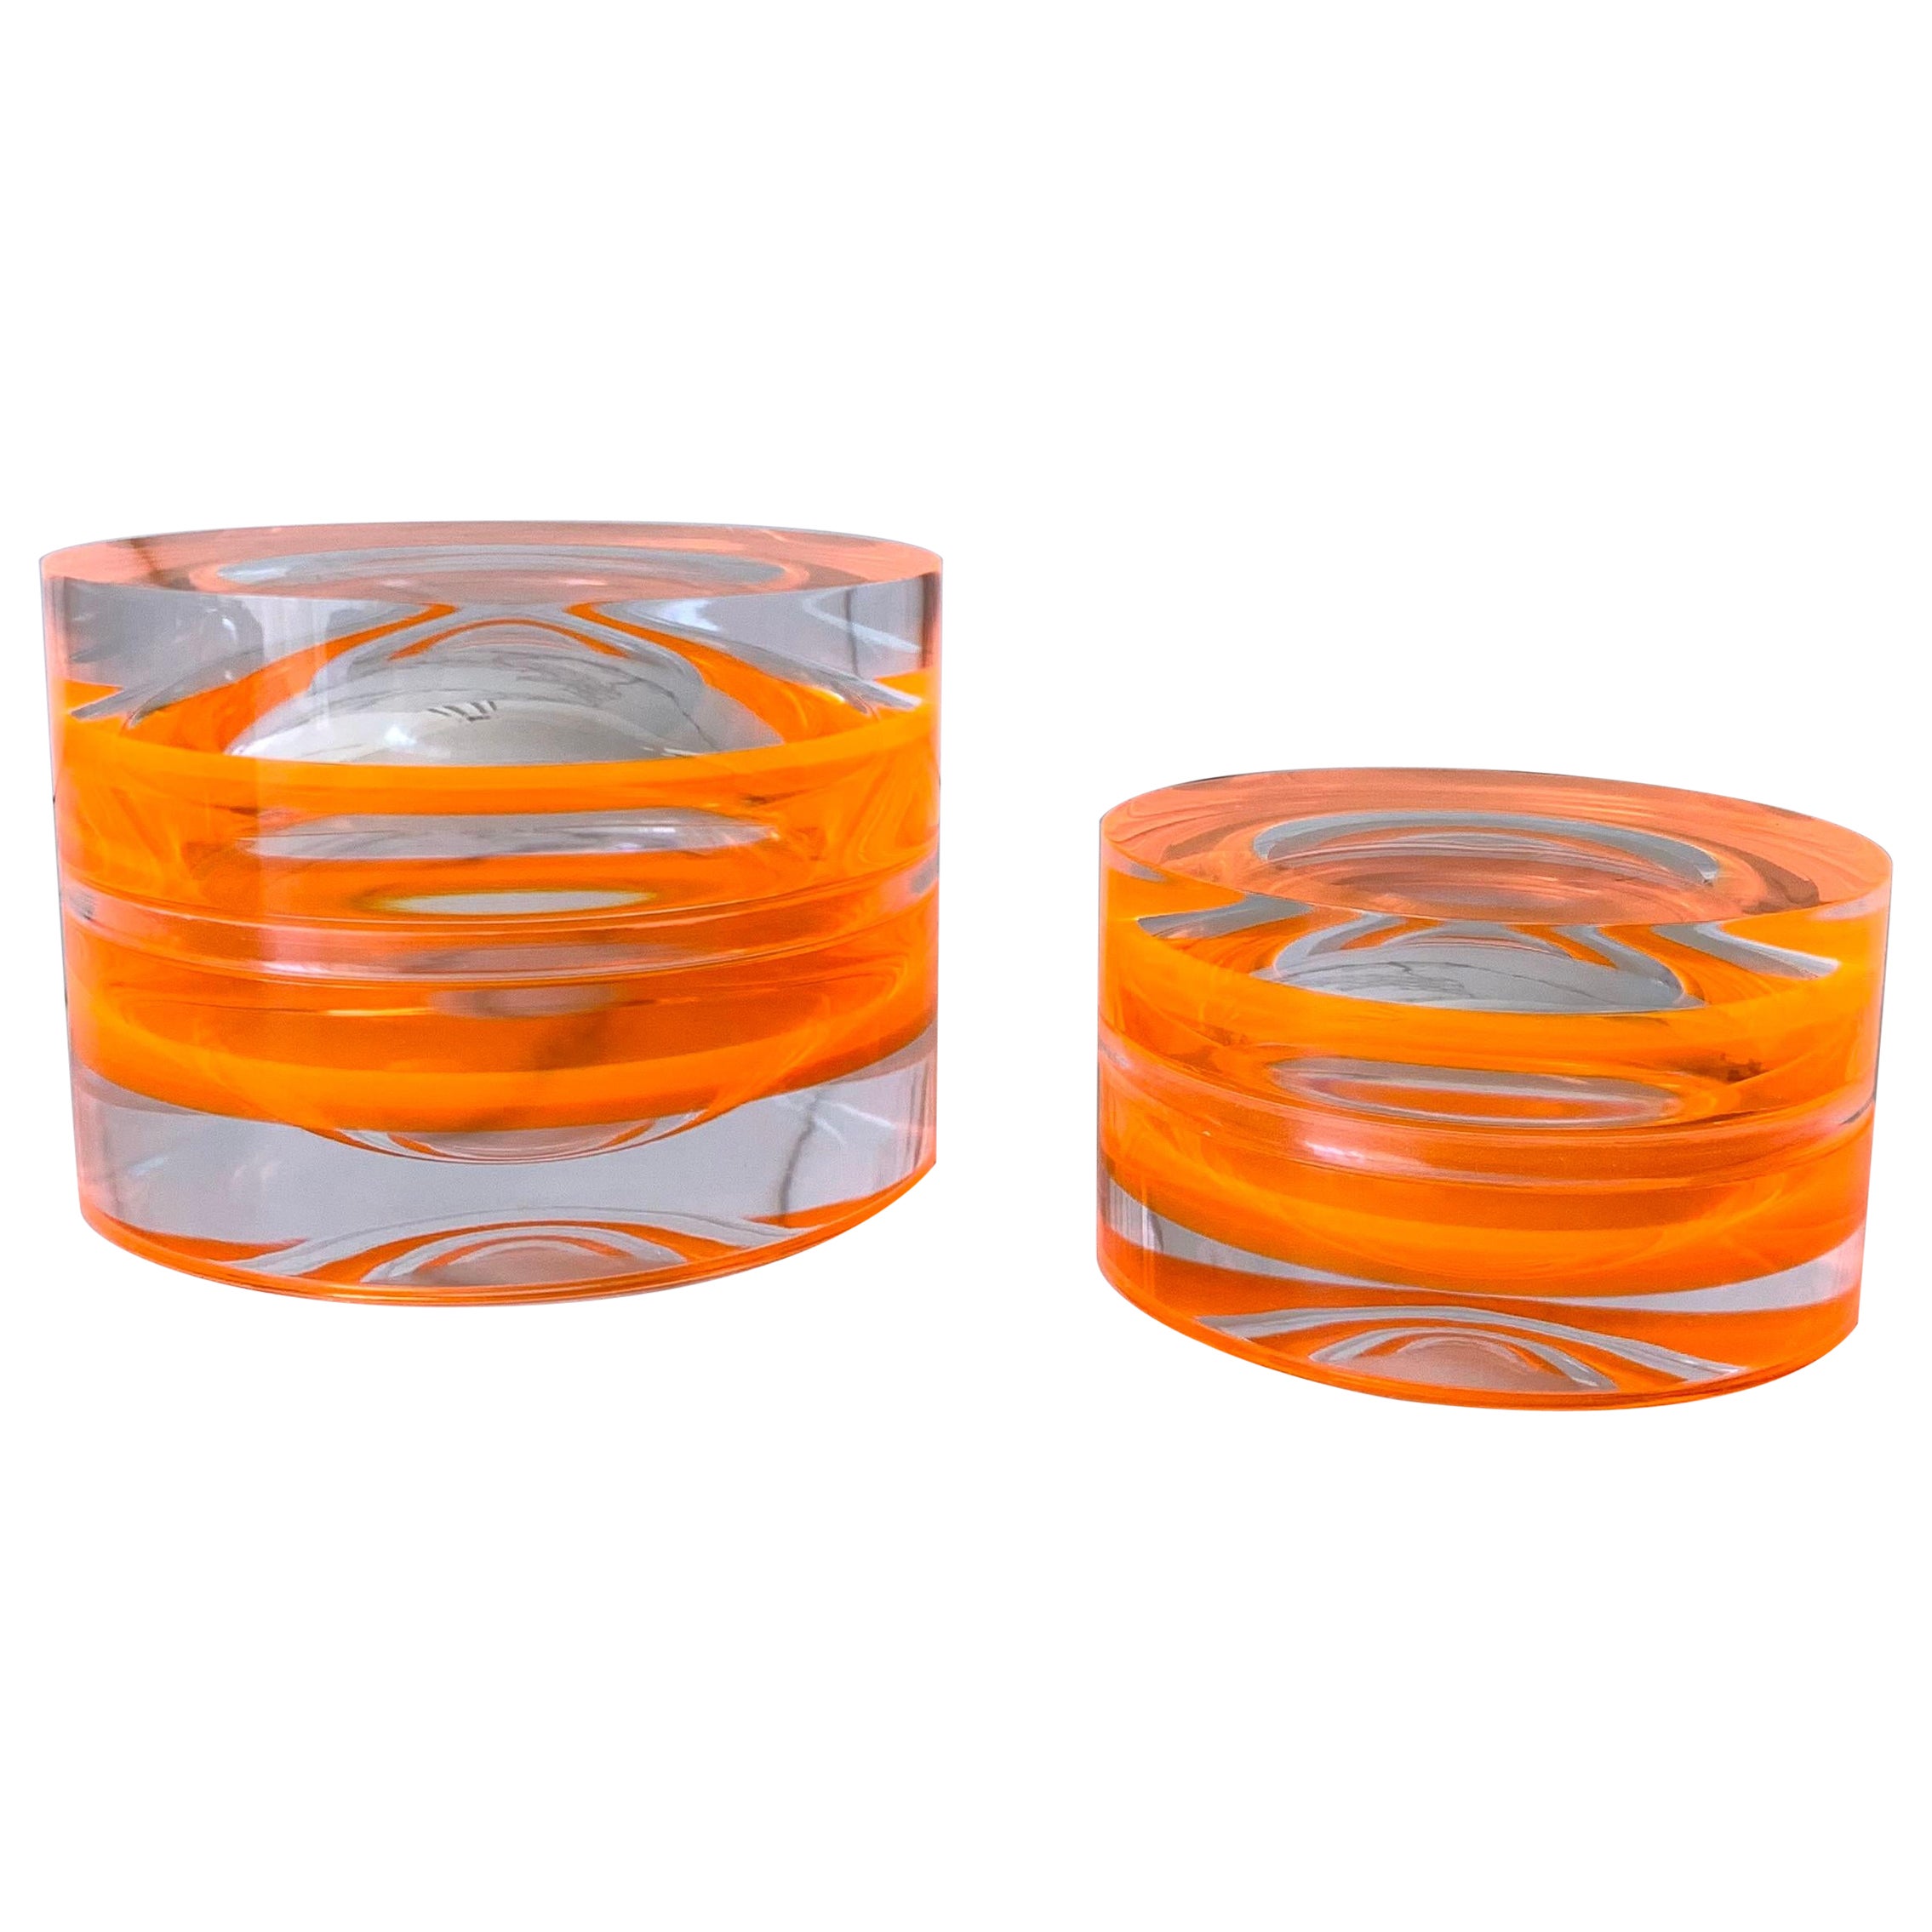 Neon Orange Acrylic Large Round Box by Paola Valle For Sale